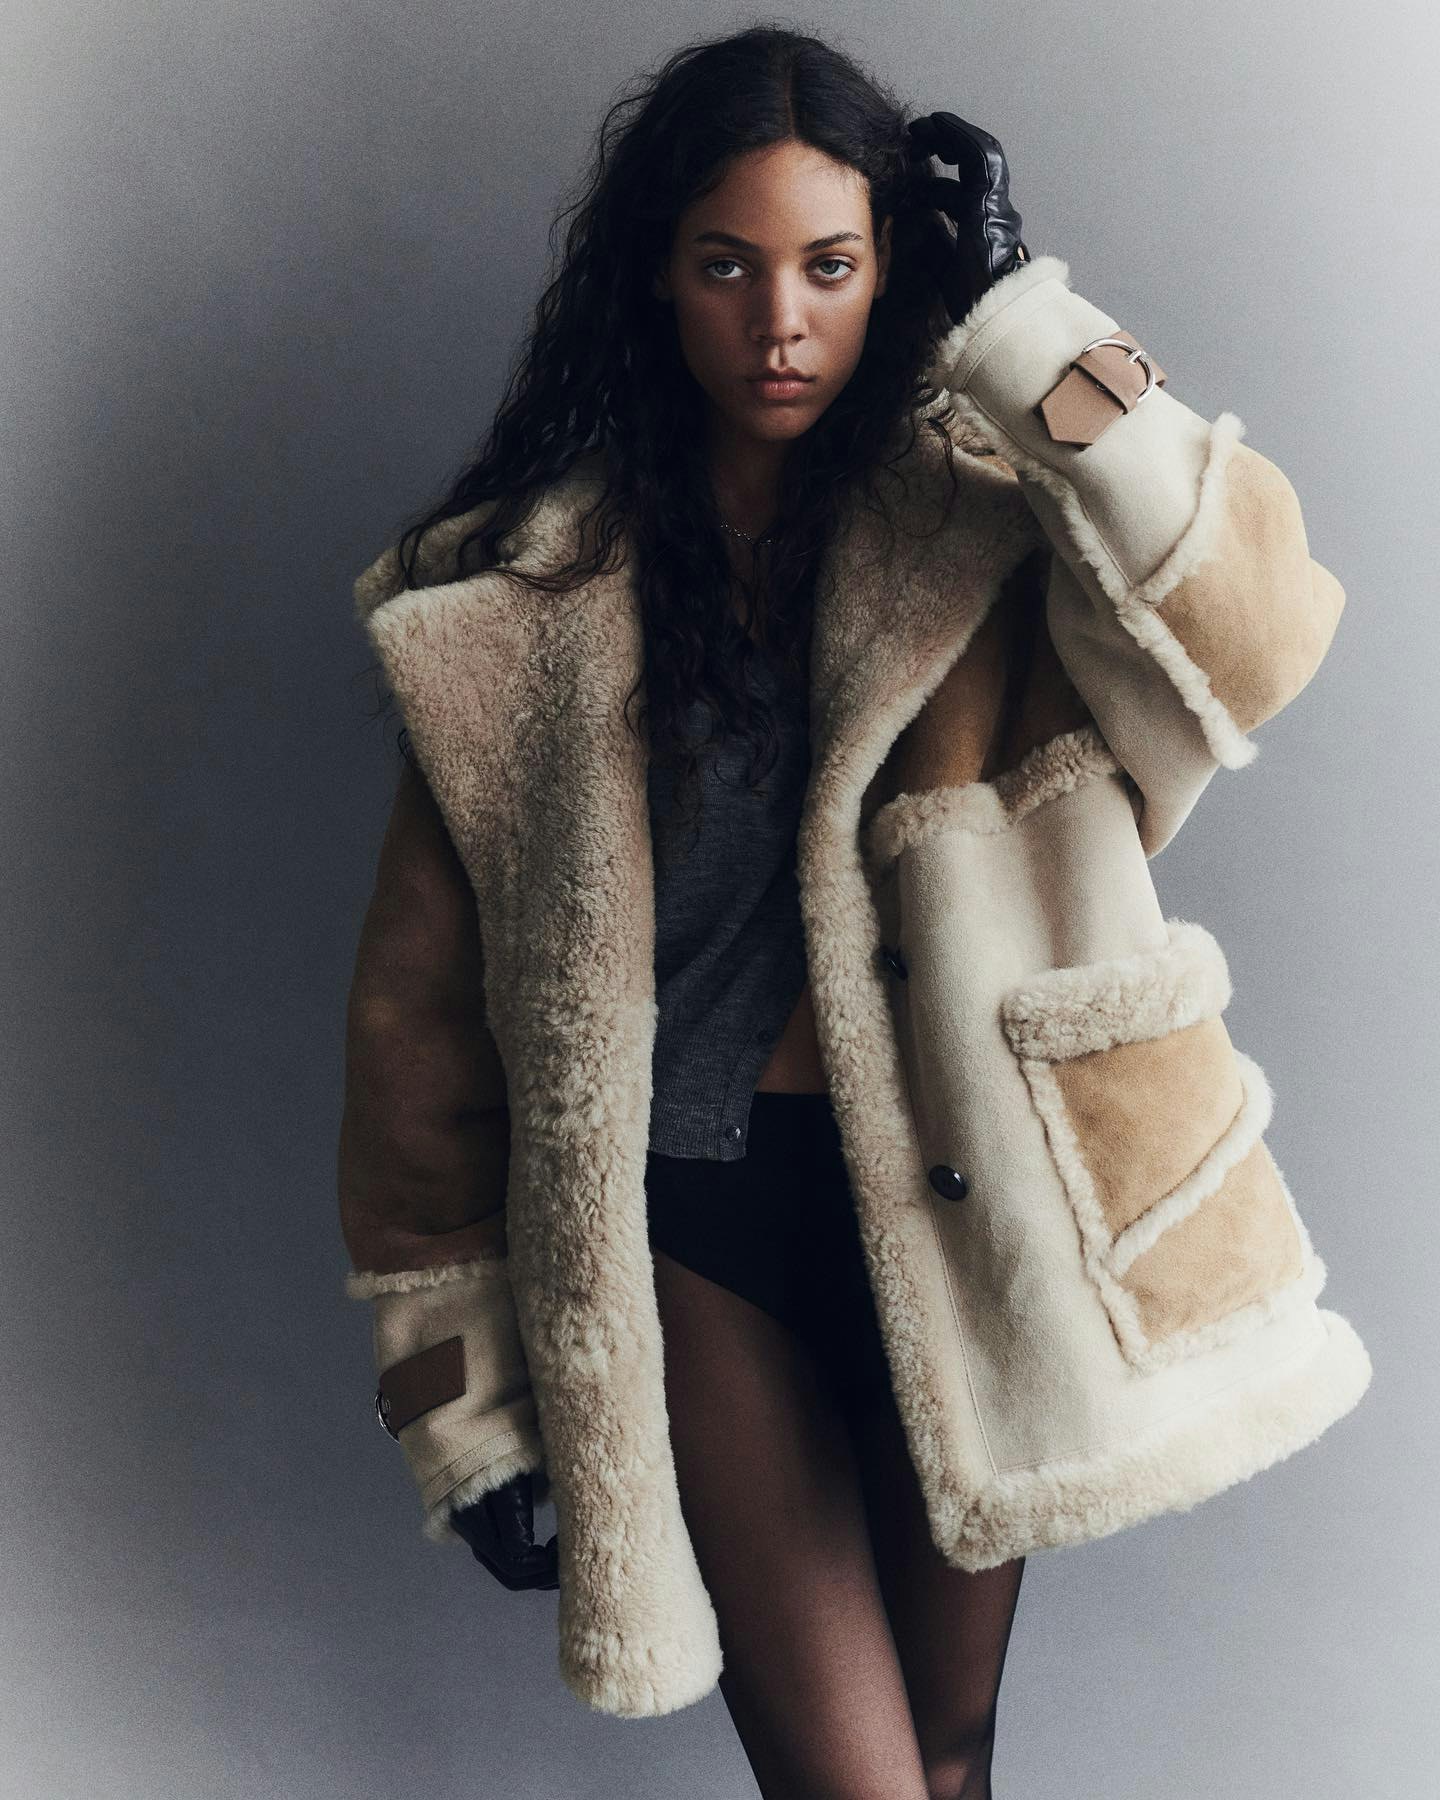 Shearling Jacket Shopping 101: A Primer On Finding Your Perfect Style